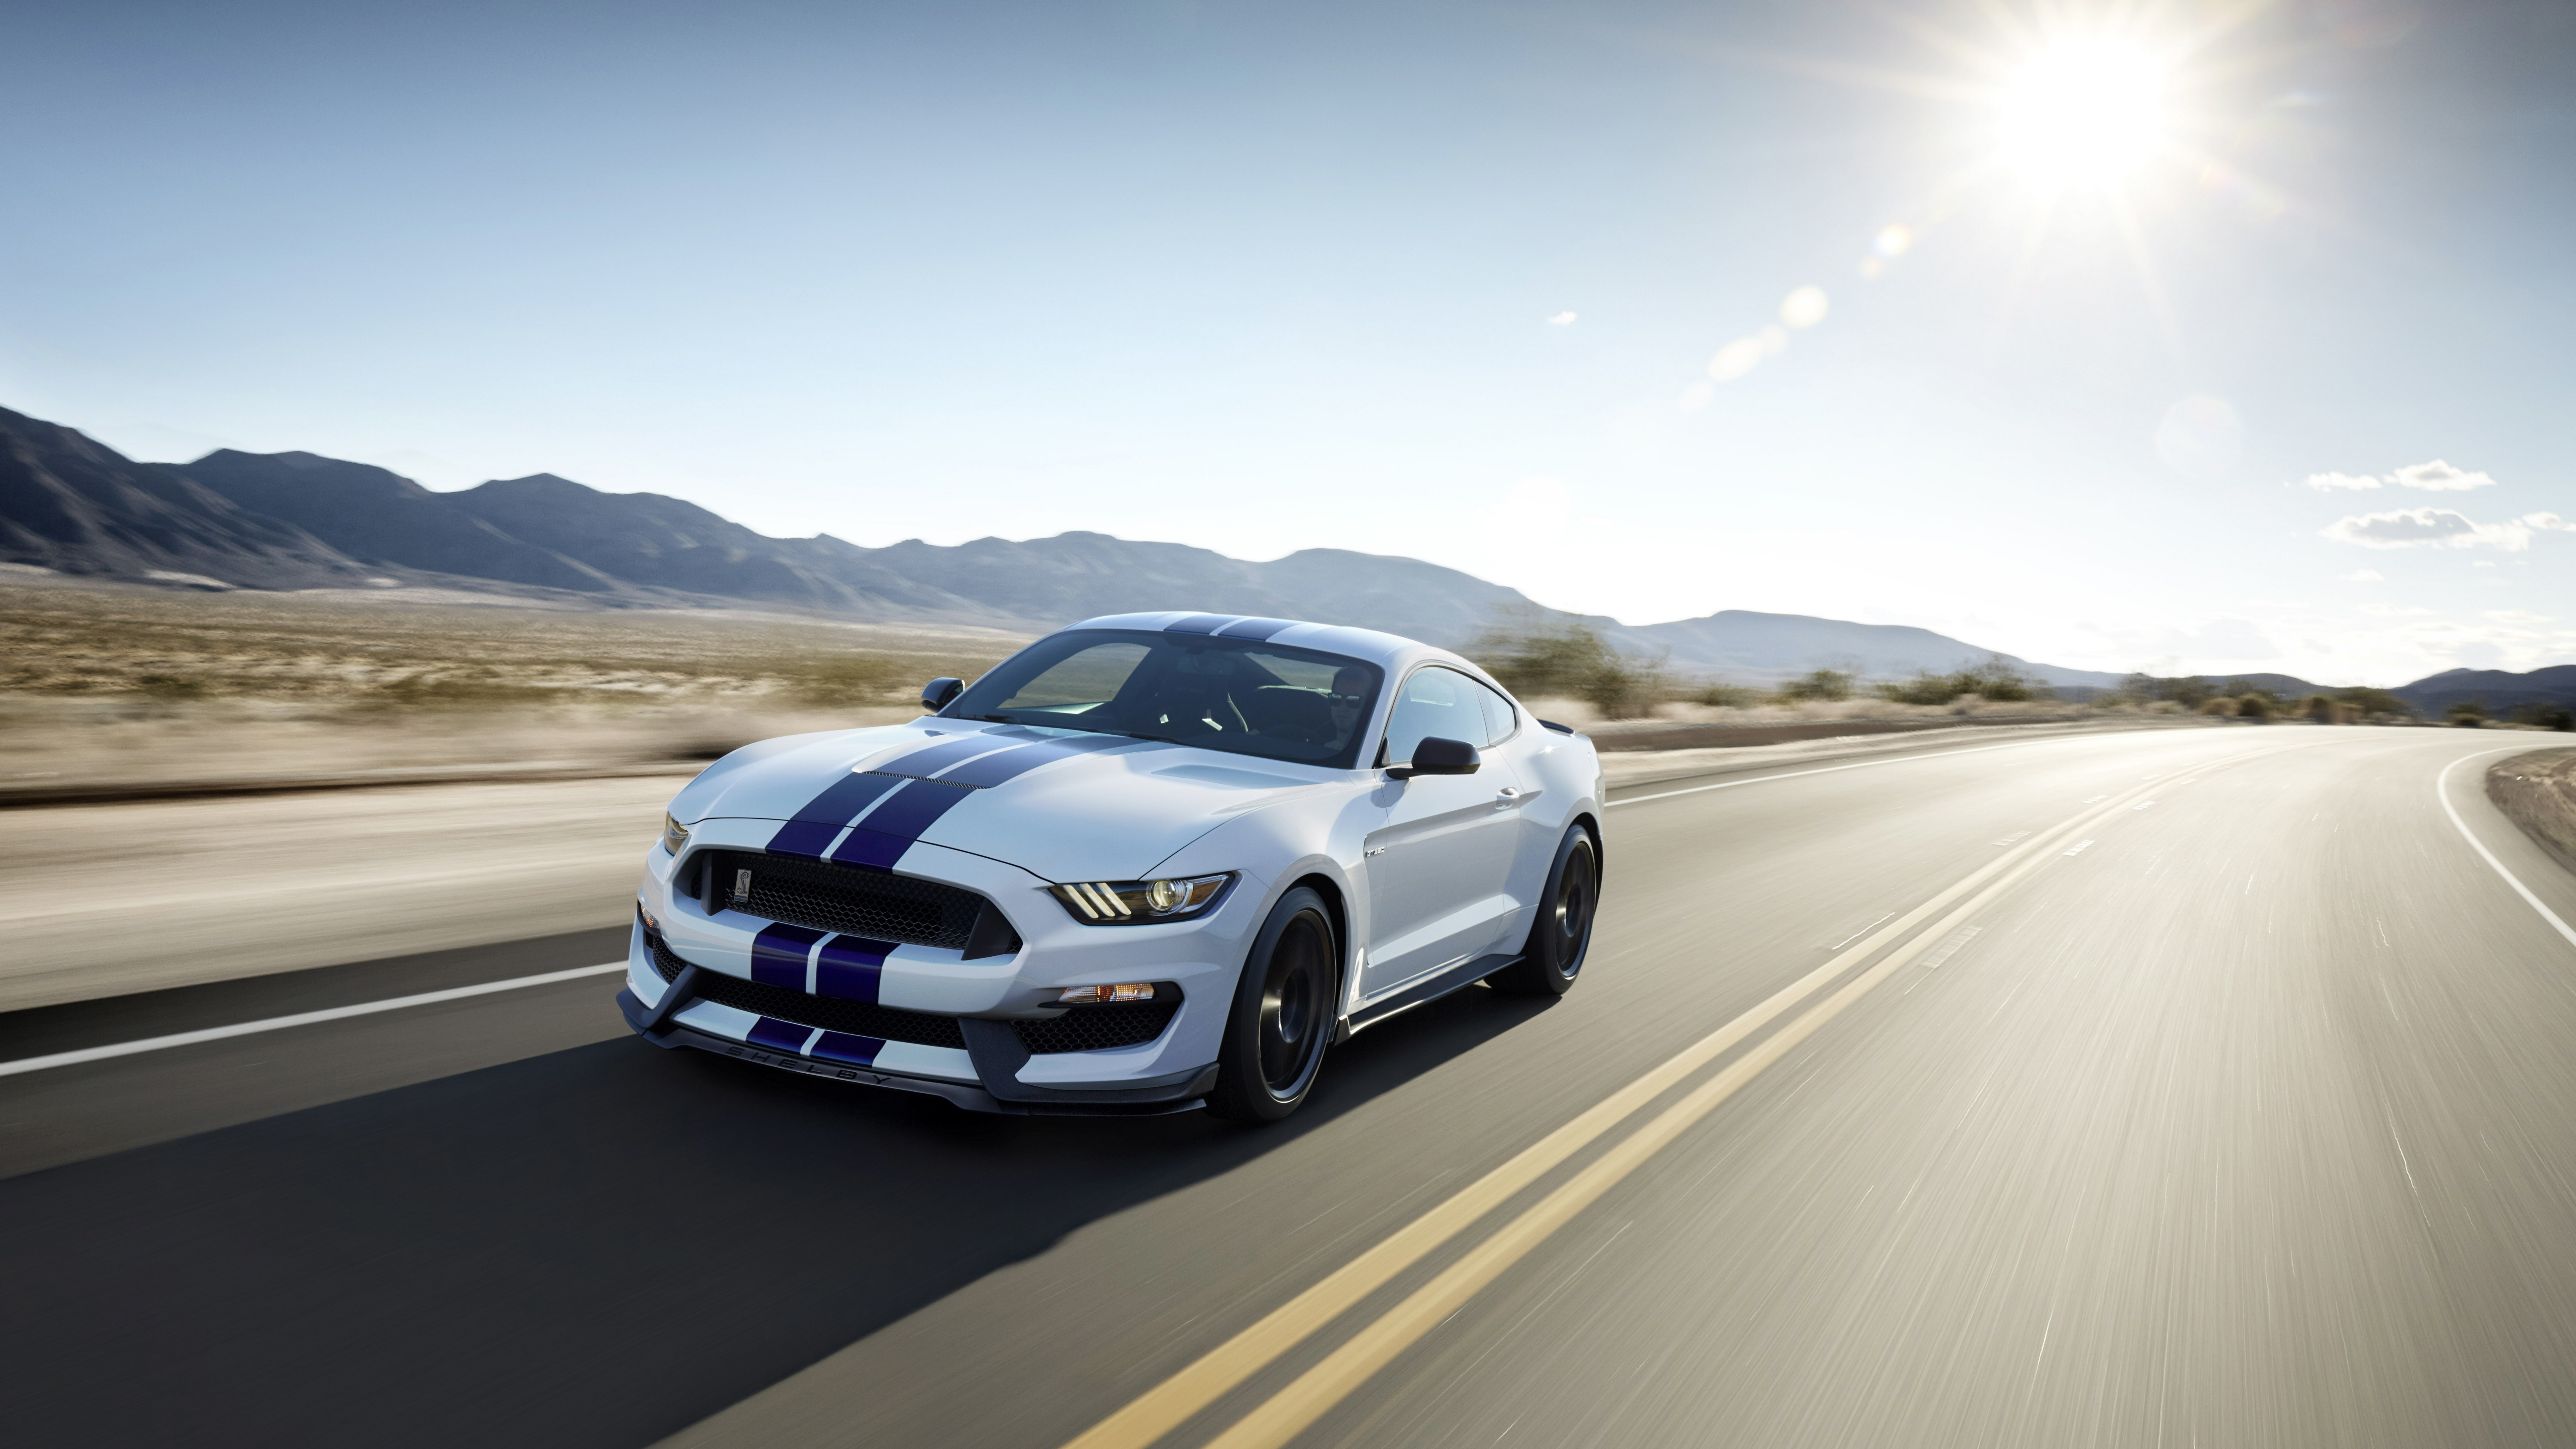 Car 2t Artist Ford Mustang Apollo Edition Vehicle White Cars Front Angle View Road Sunlight Sky Clou 7680x4320